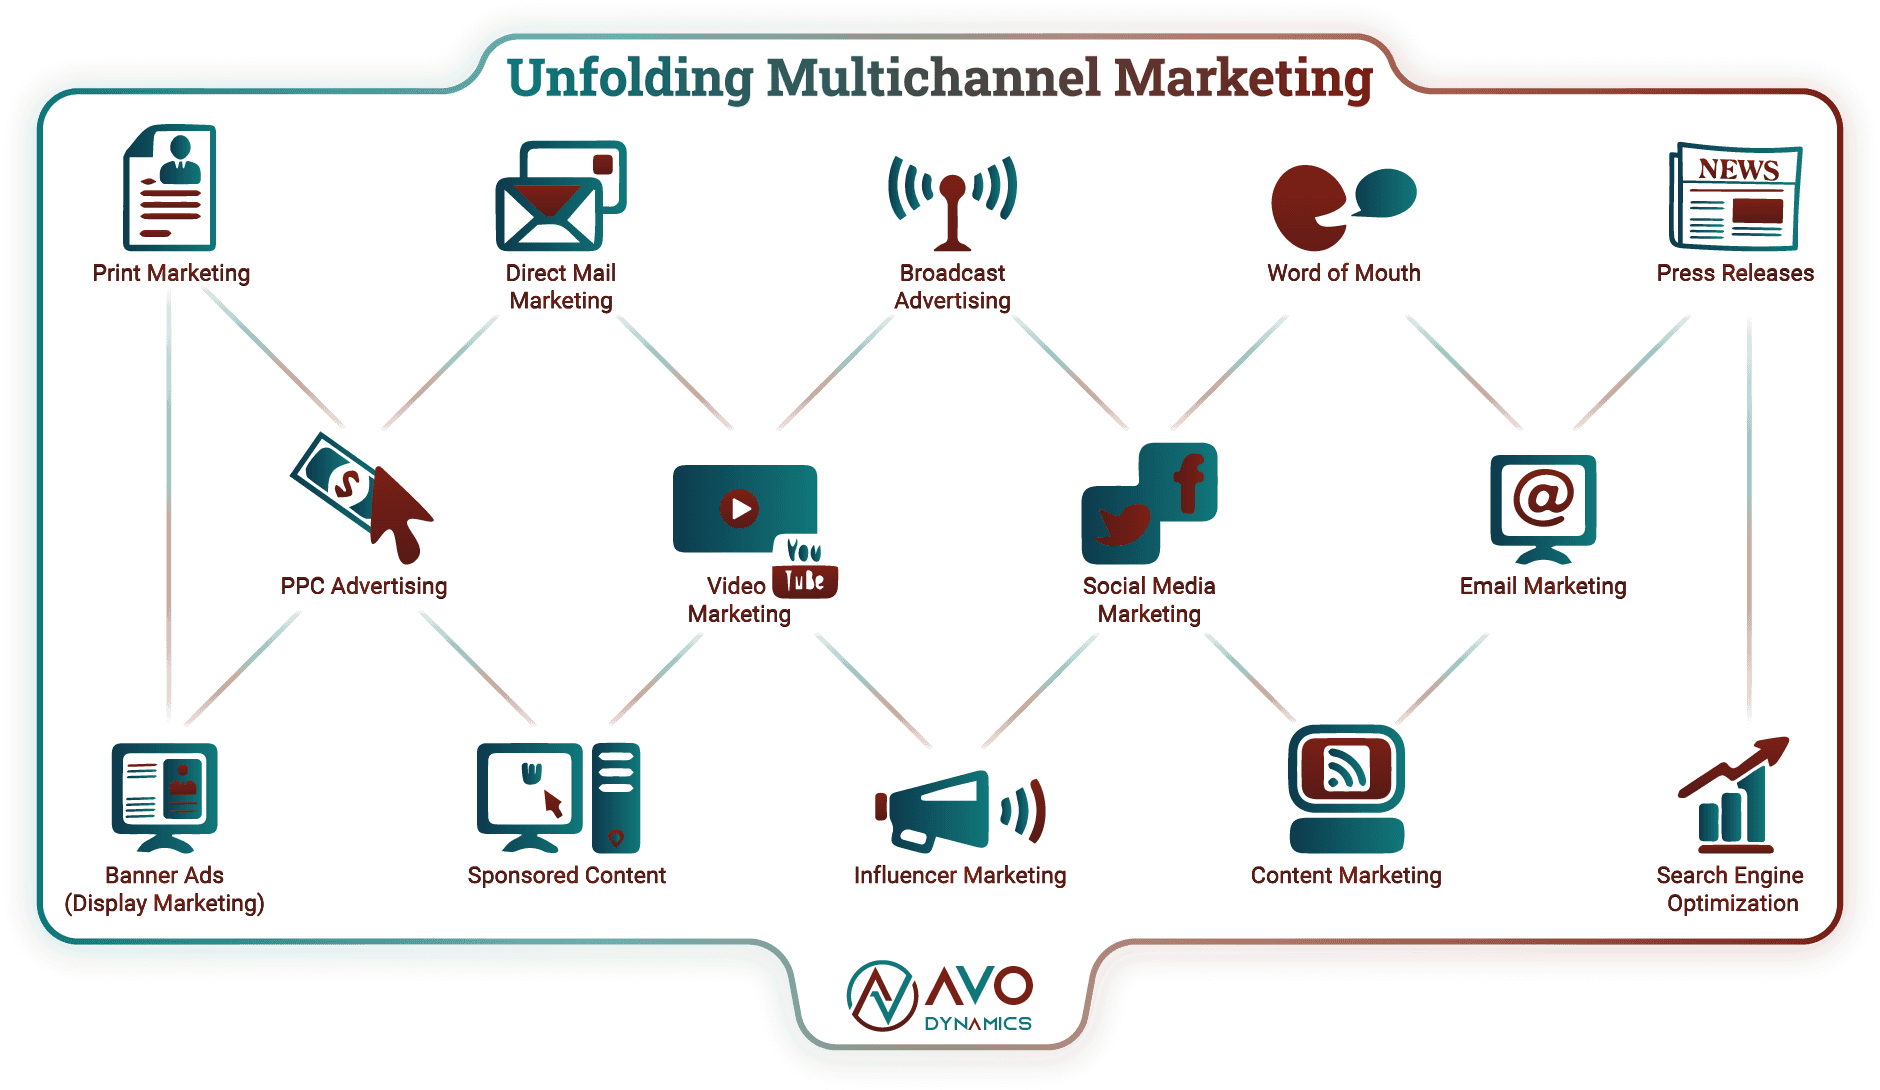 Overview of multichannel marketing platforms listed in order from old media to new media: Print Marketing, Direct Mail Marketing, Broadcast Advertising, Word of Mouth, Press Releases, PPC Advertising, Video Marketing, Social Media Marketing, Email Marketing, Banner Ads, Sponsored Content, Influencer Marketing, Content Marketing & Search Engine Optimization